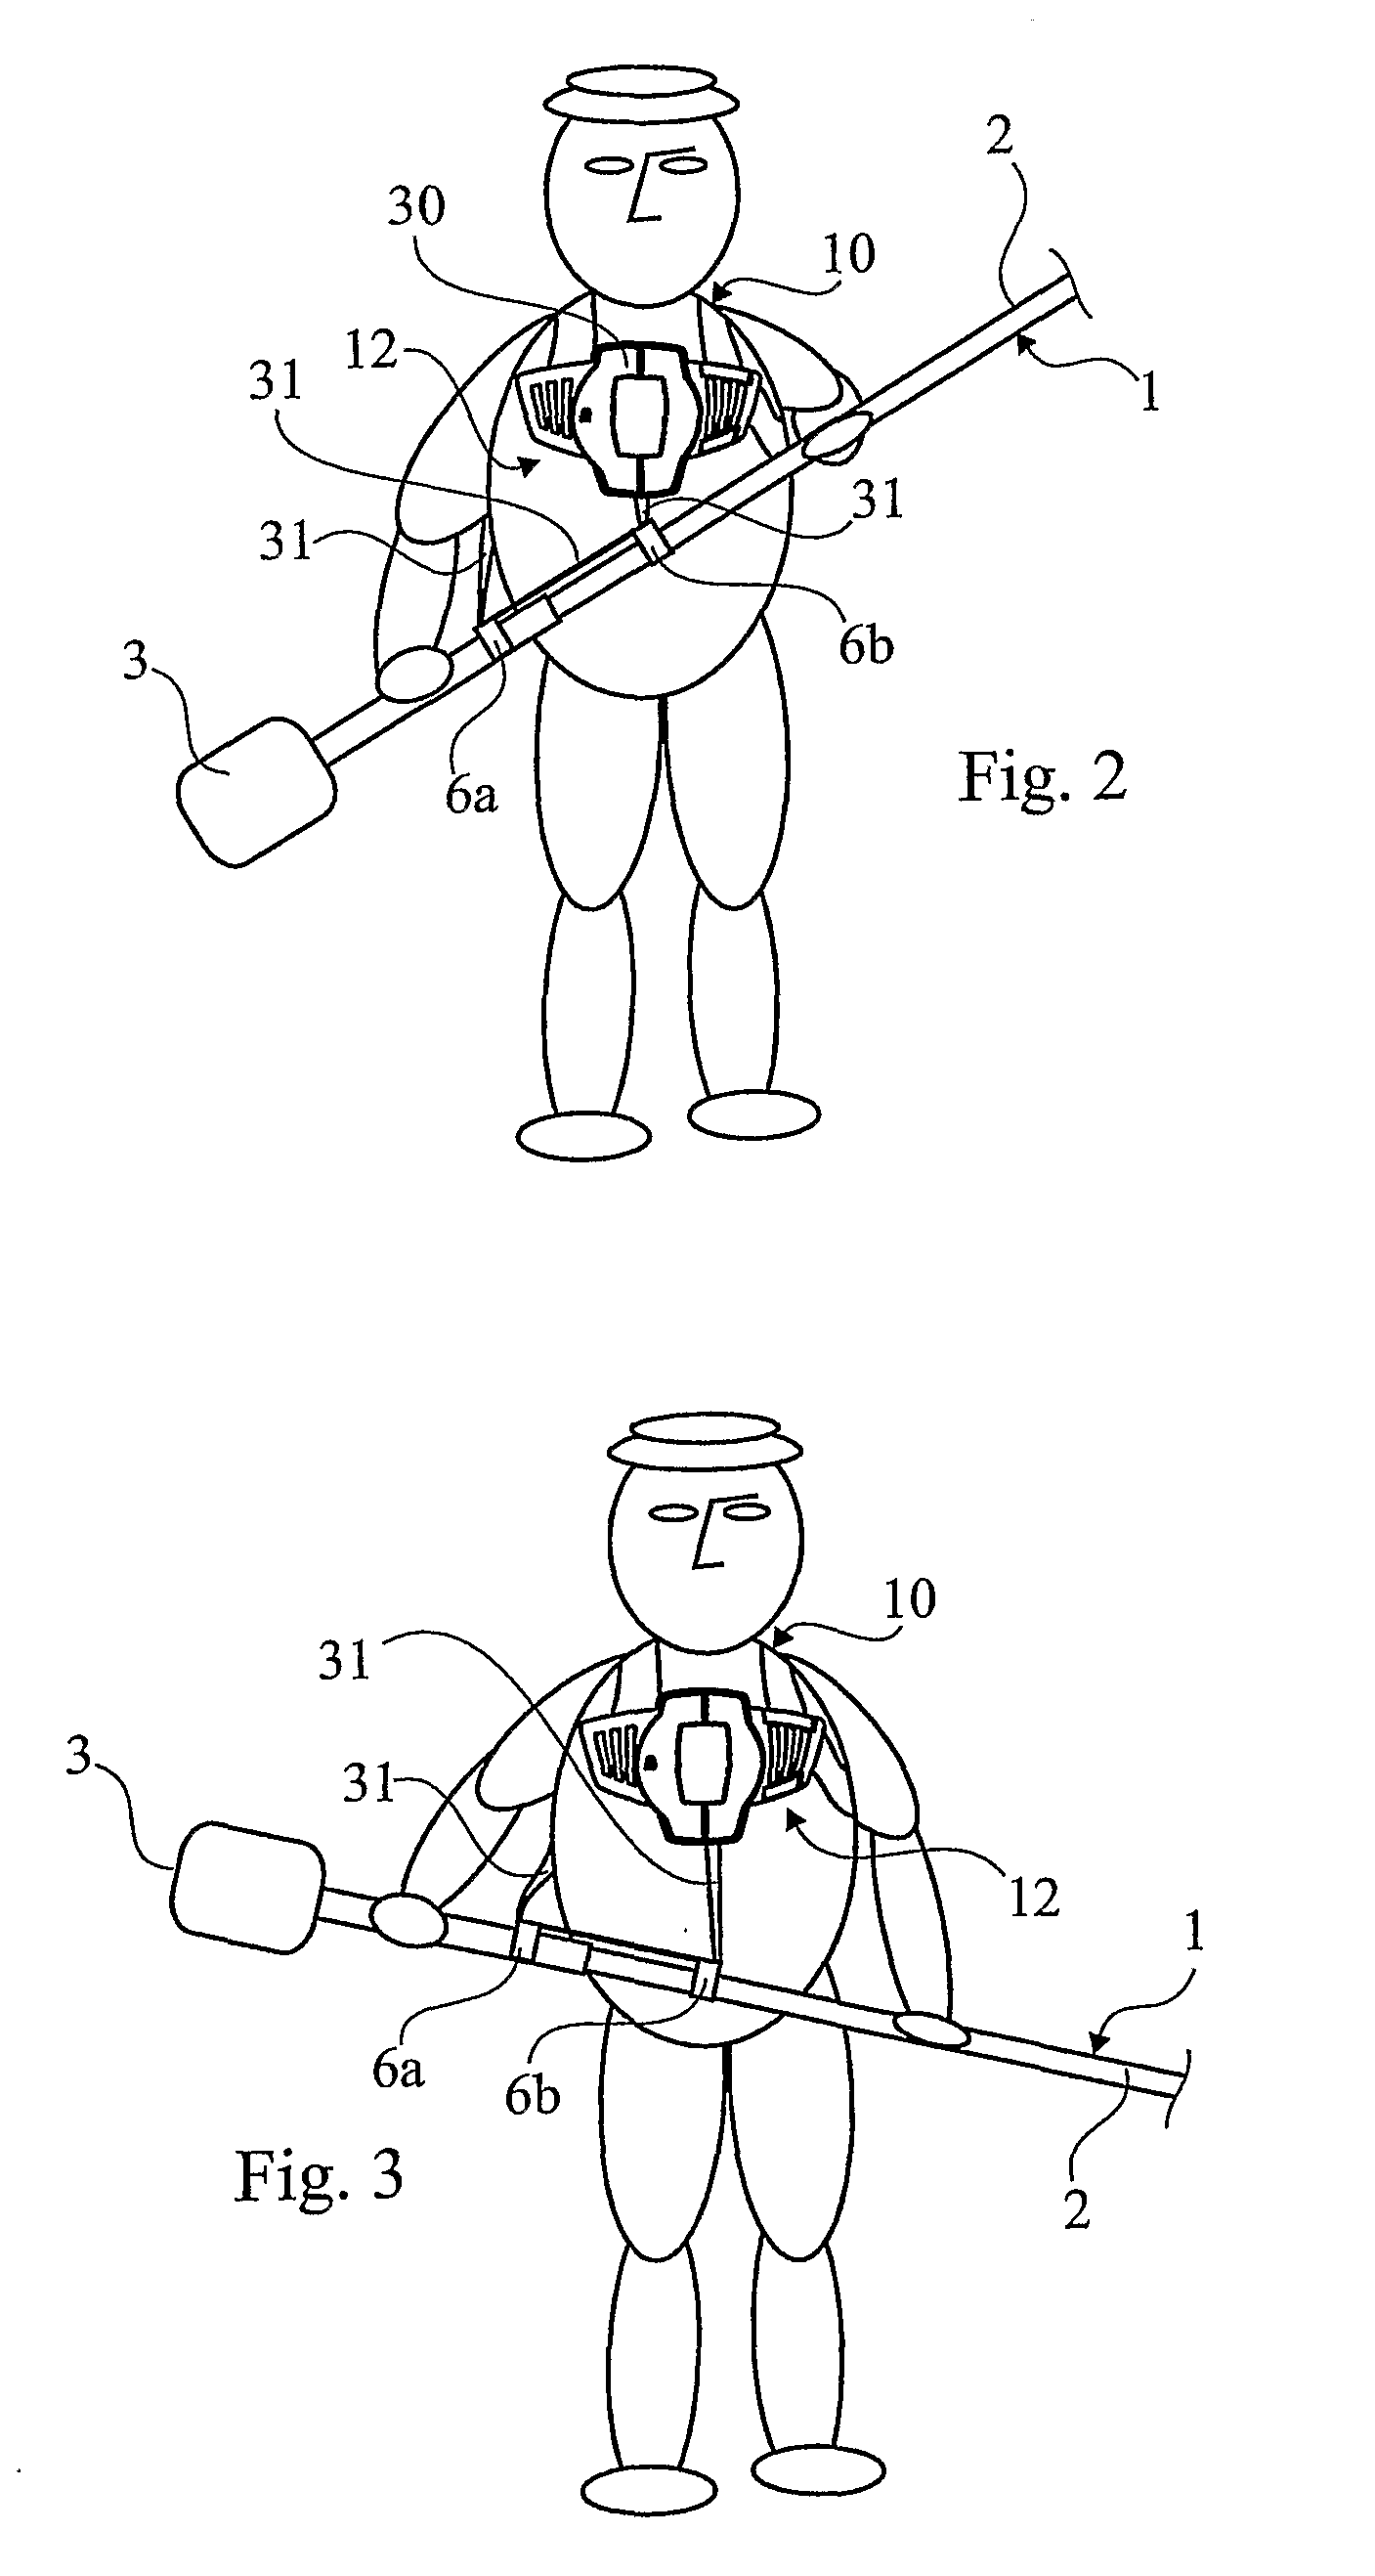 Harness for power tool having a pole